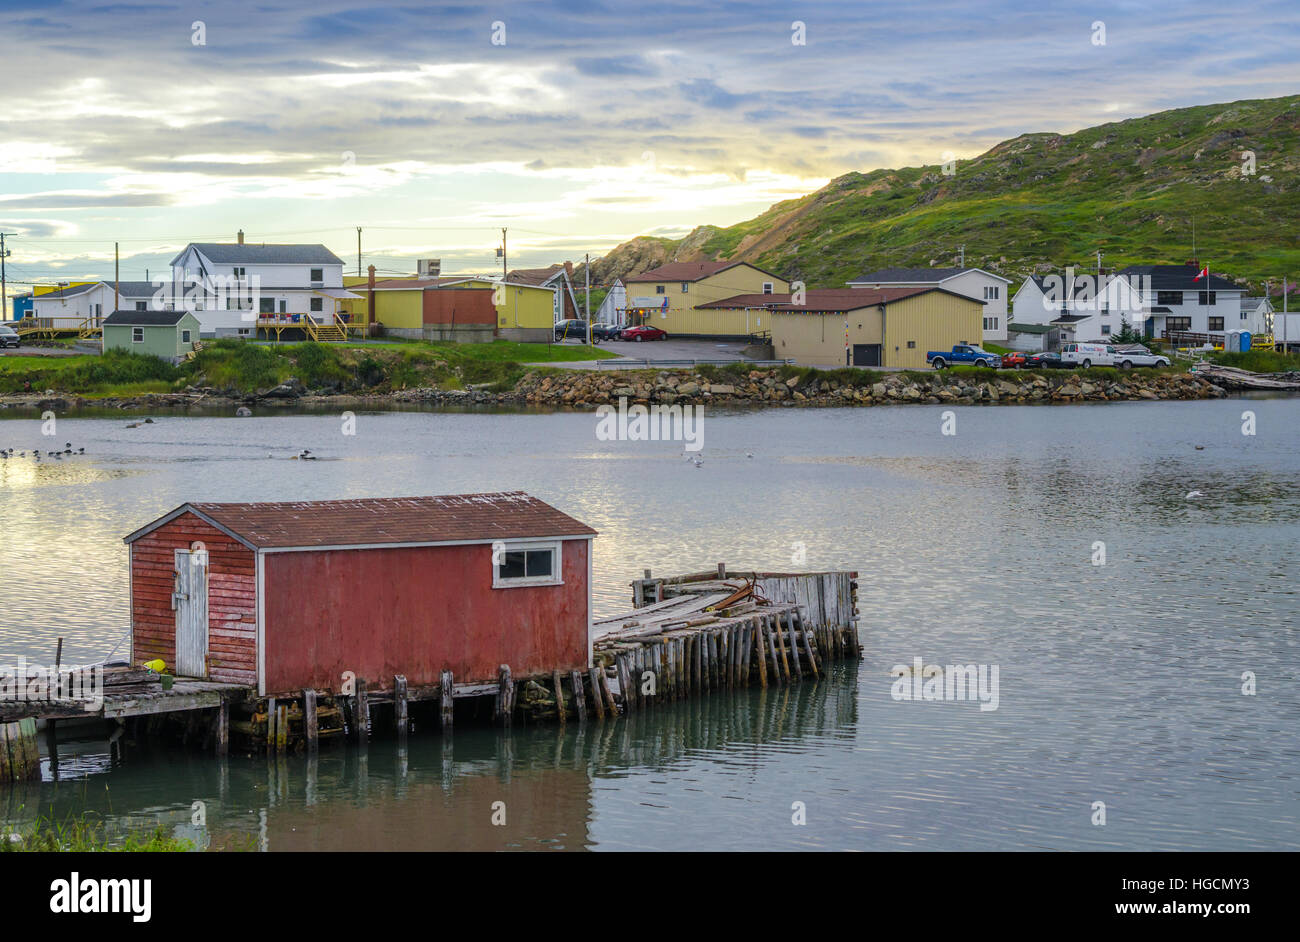 Sunset at little red dock house in village community of Twillingate, Newfoundland. Stock Photo